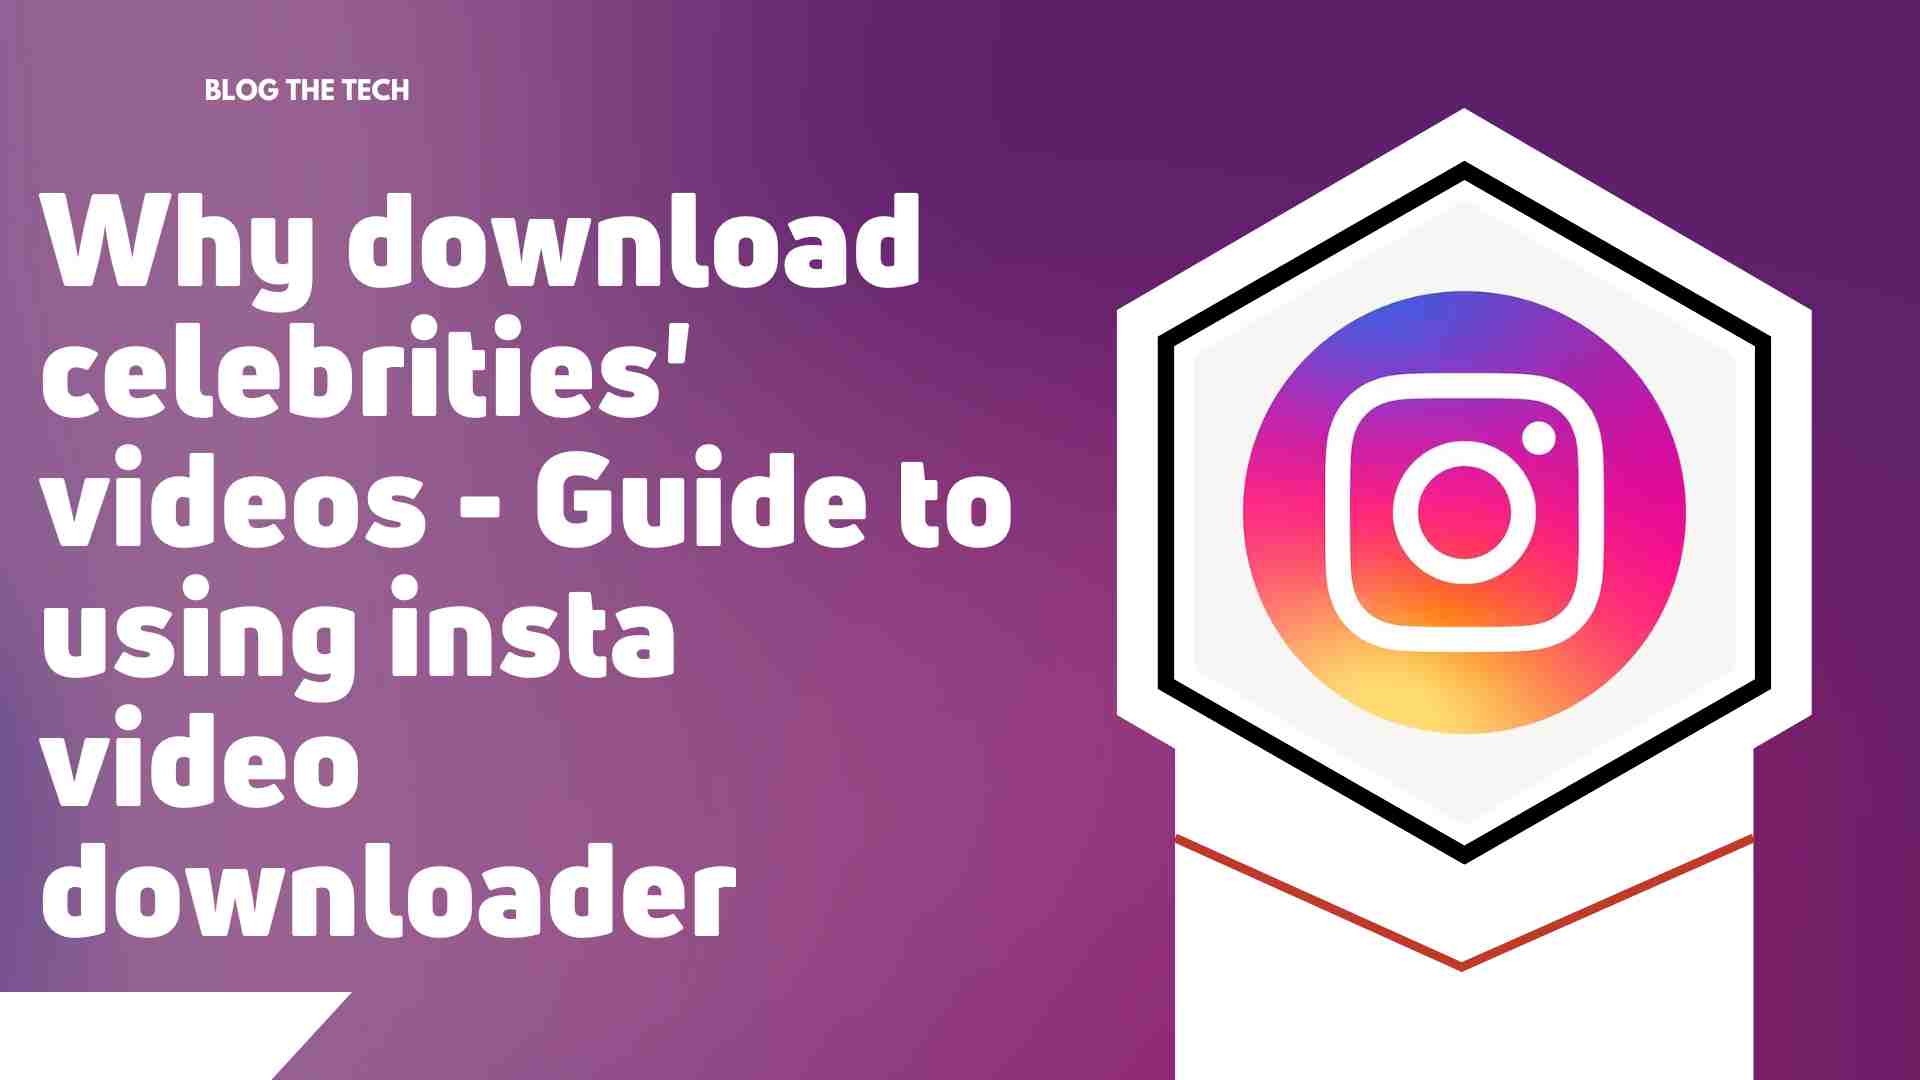 Why download celebrities' videos - Guide to using insta video downloader